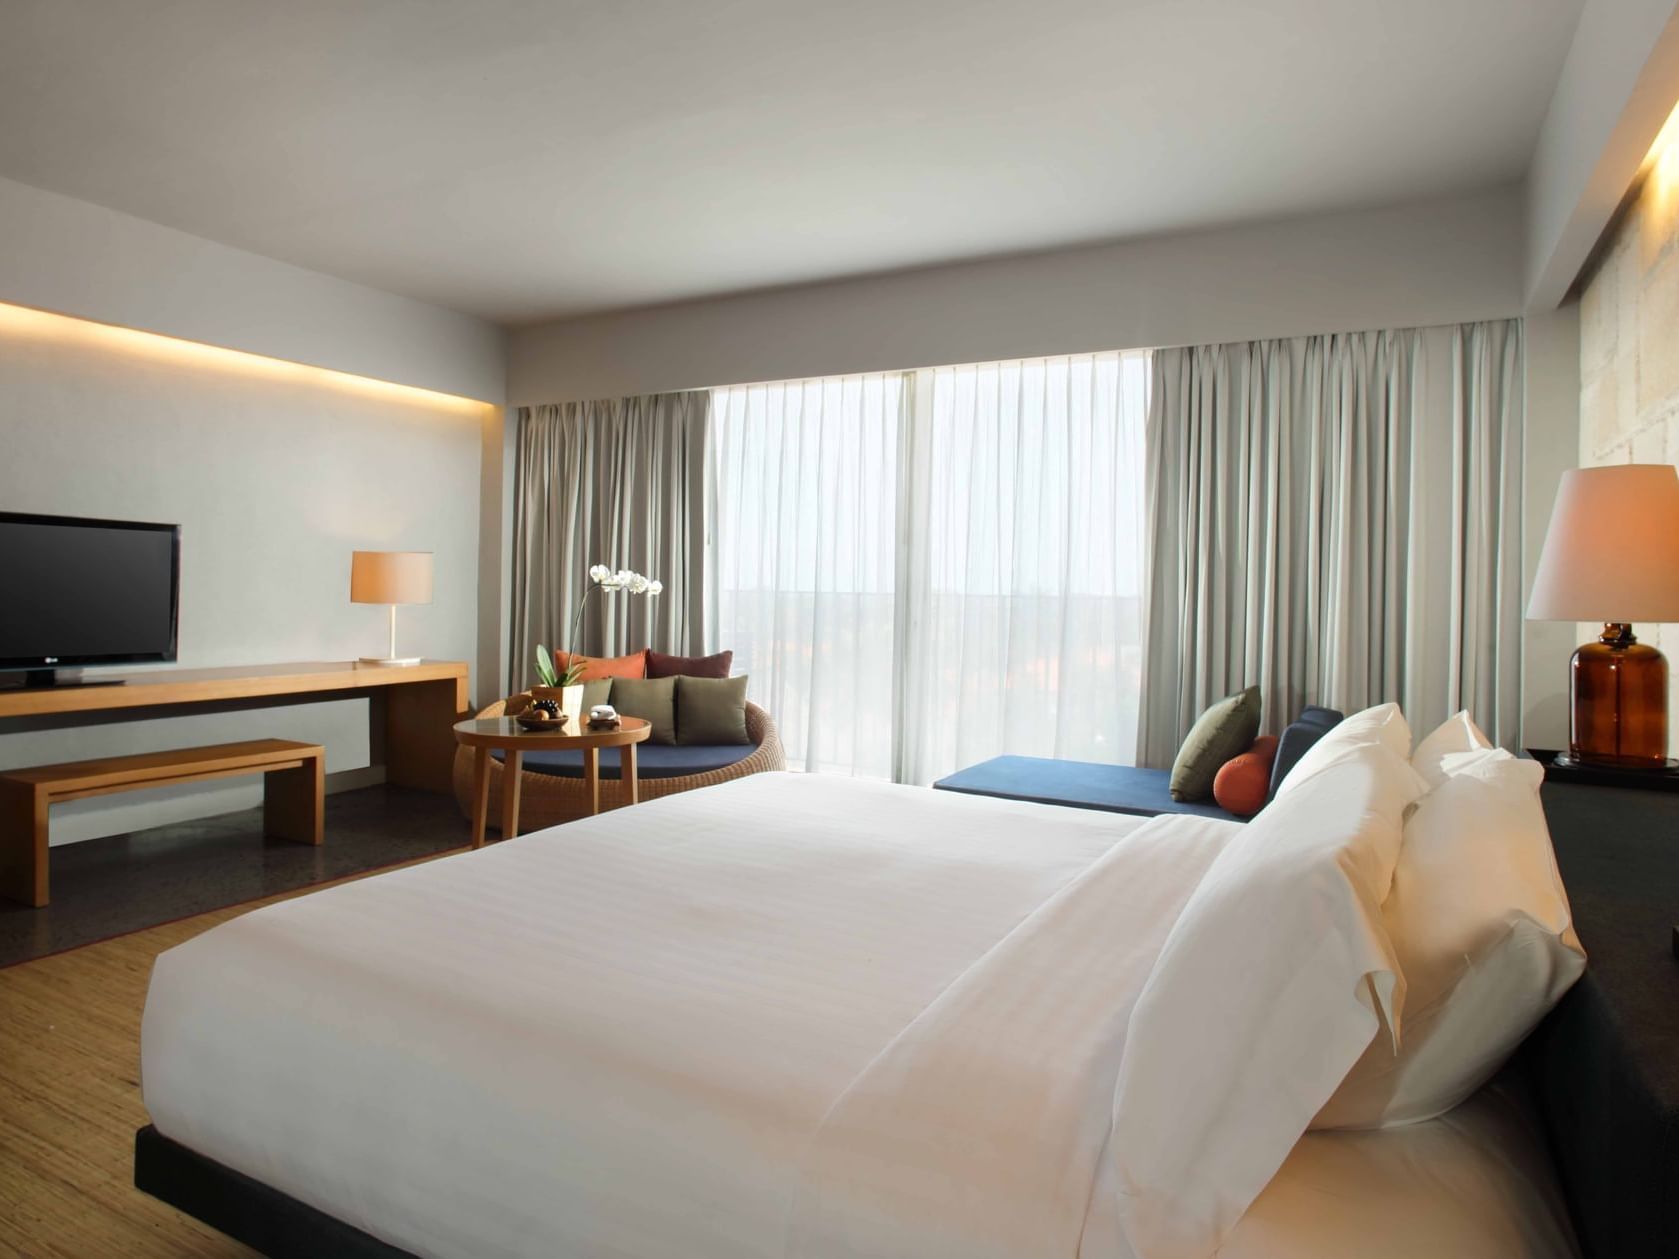 Bed with white beddings in Suites at U Hotels and Resorts